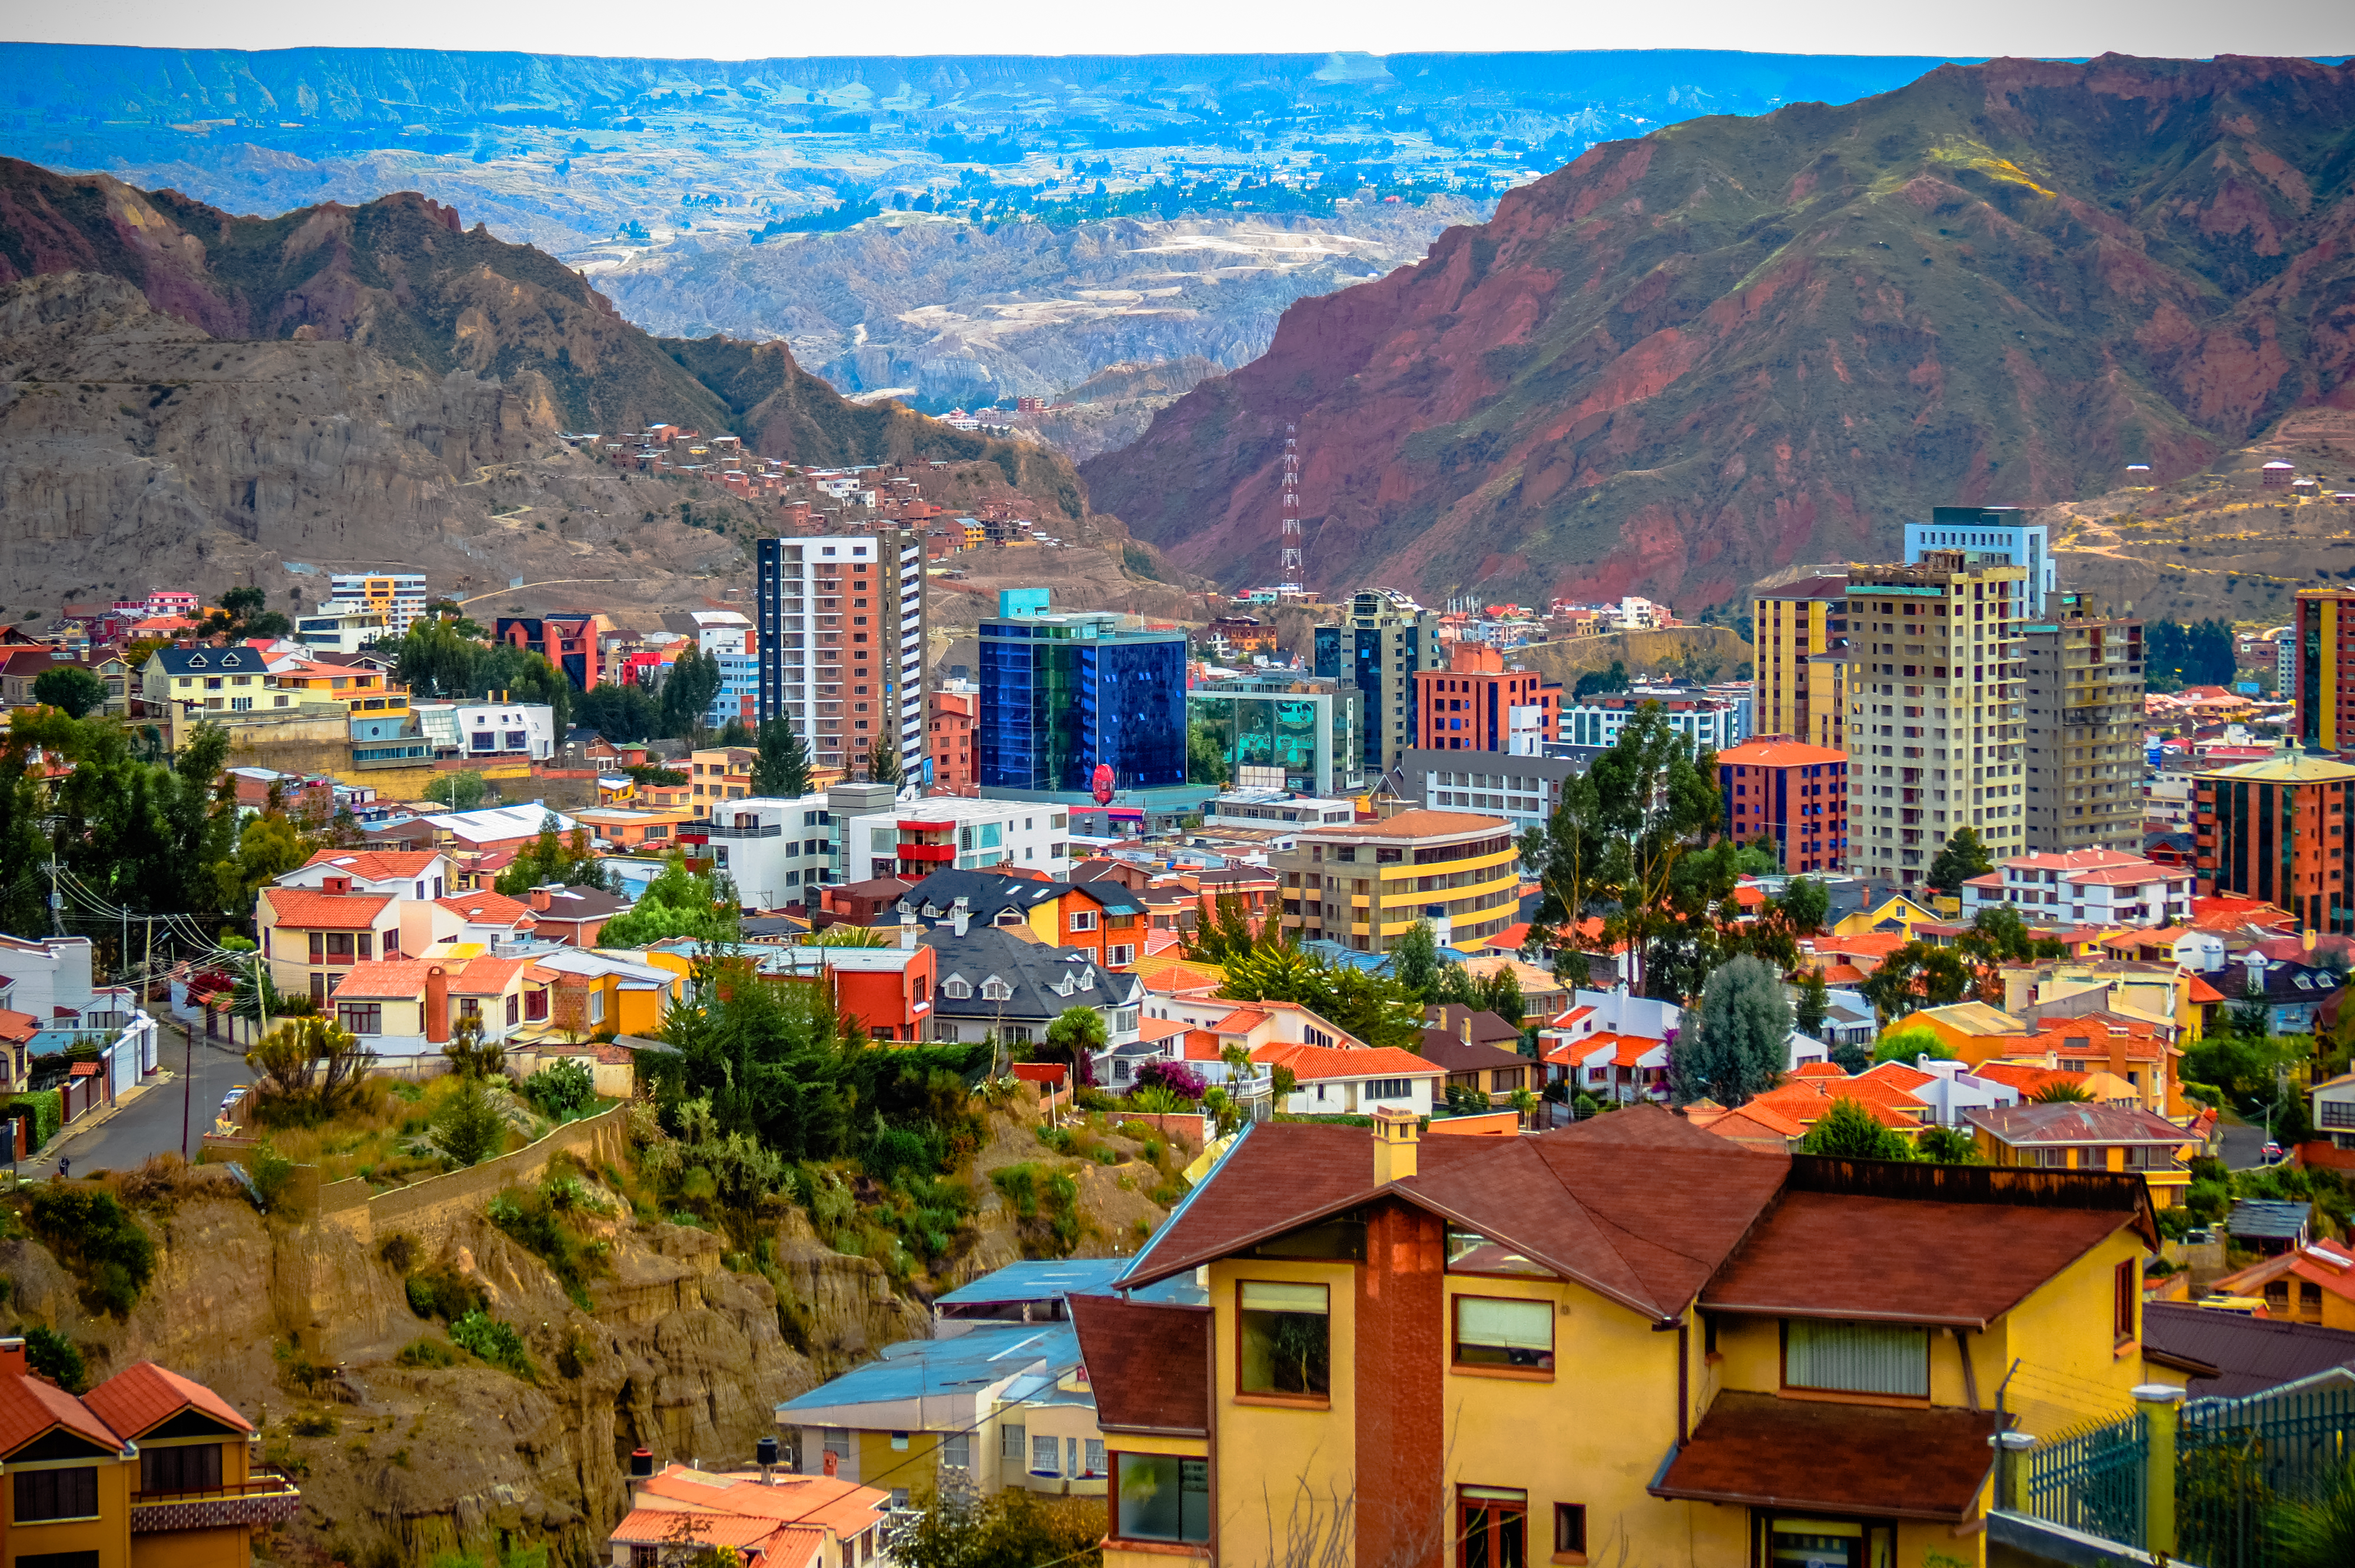 Colorful City in Bolivia by Matthew Straubmuller